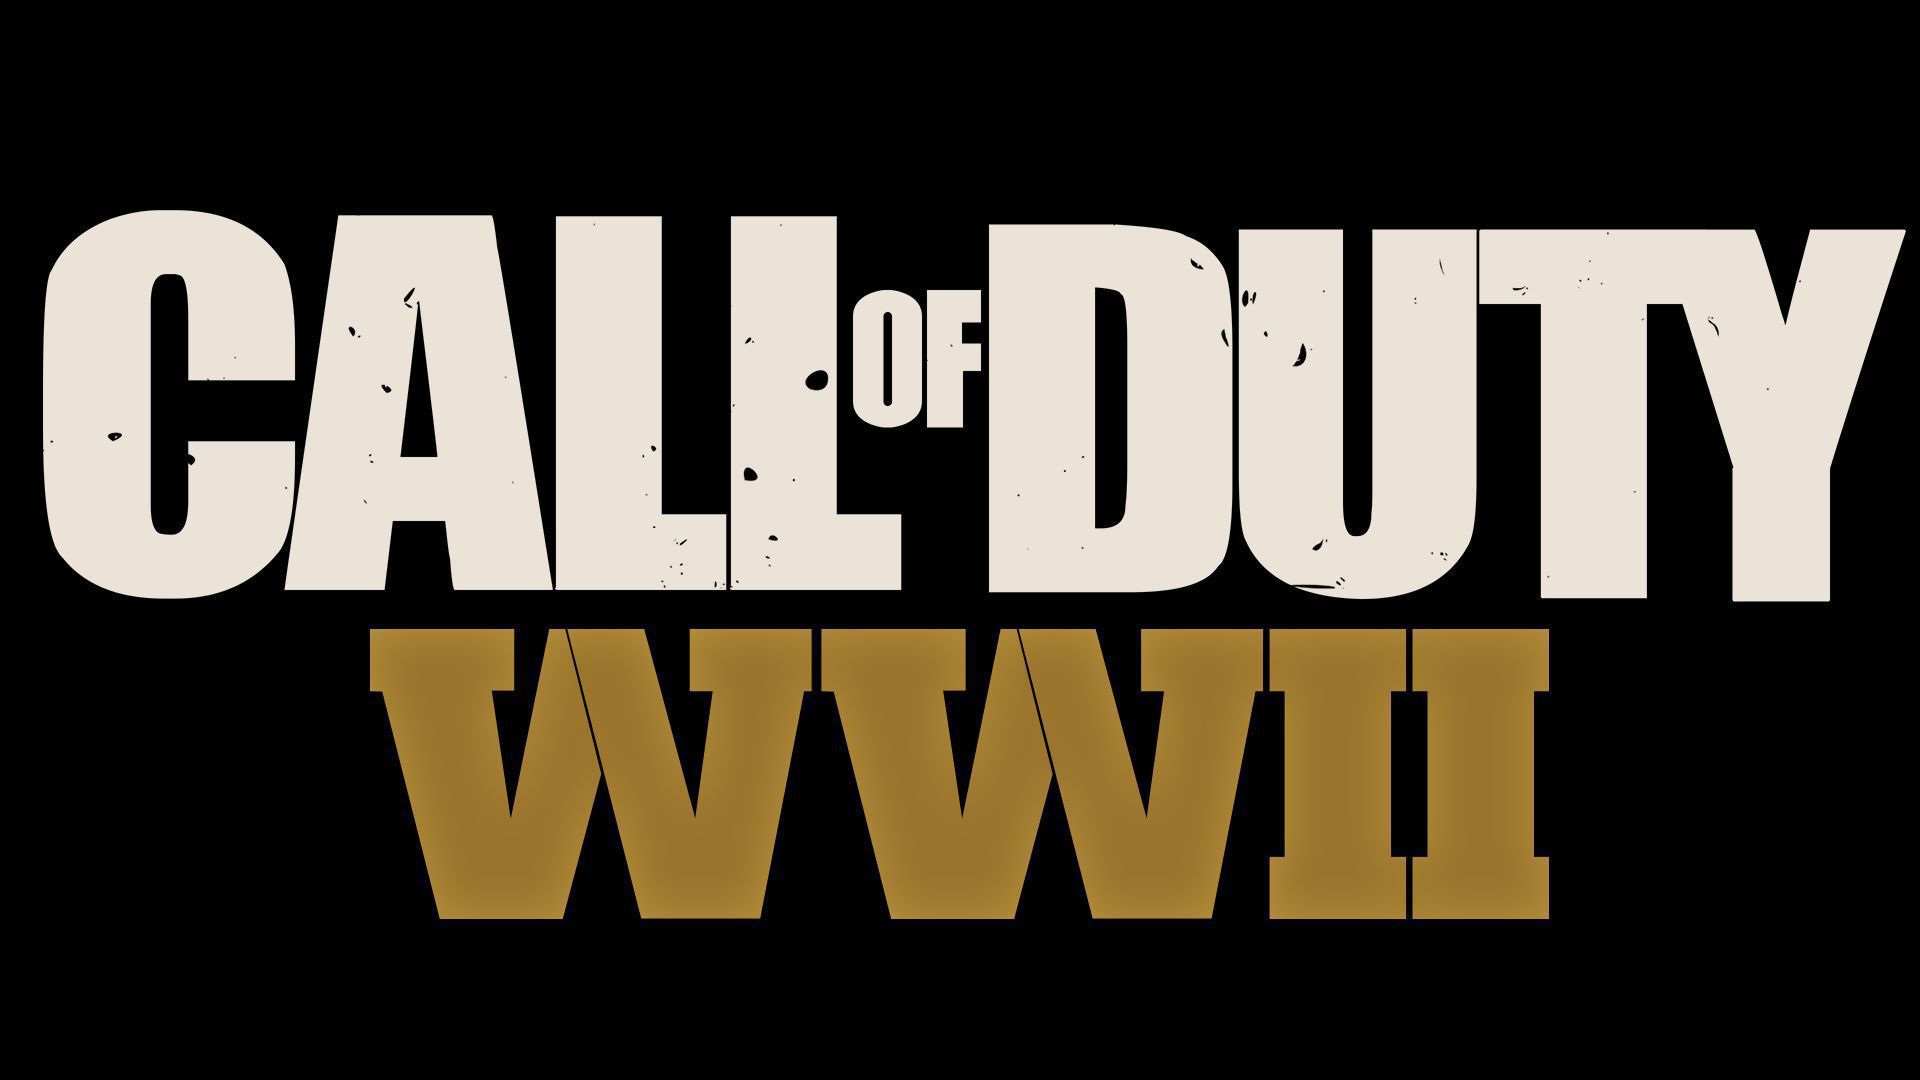 Call of Duty WWII Wallpaper Image Photo Picture Background